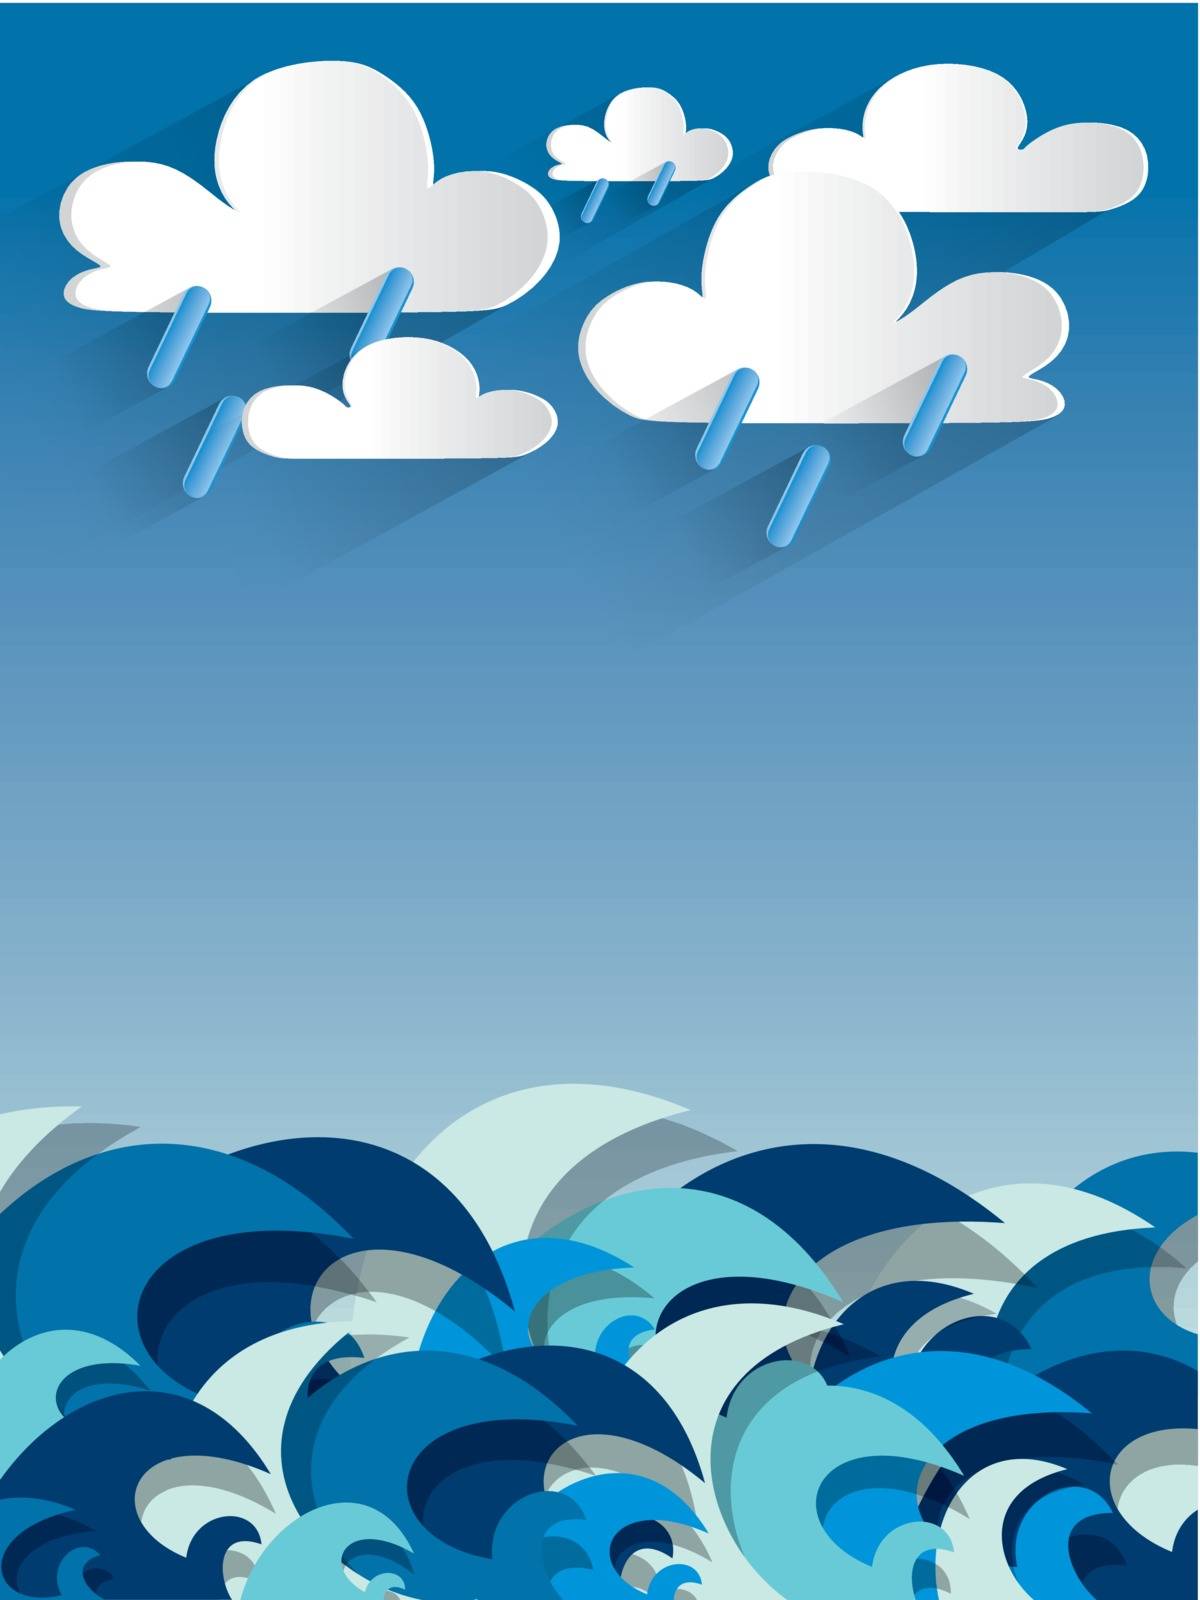 Ocean Background During A Rainy Day vector illustration